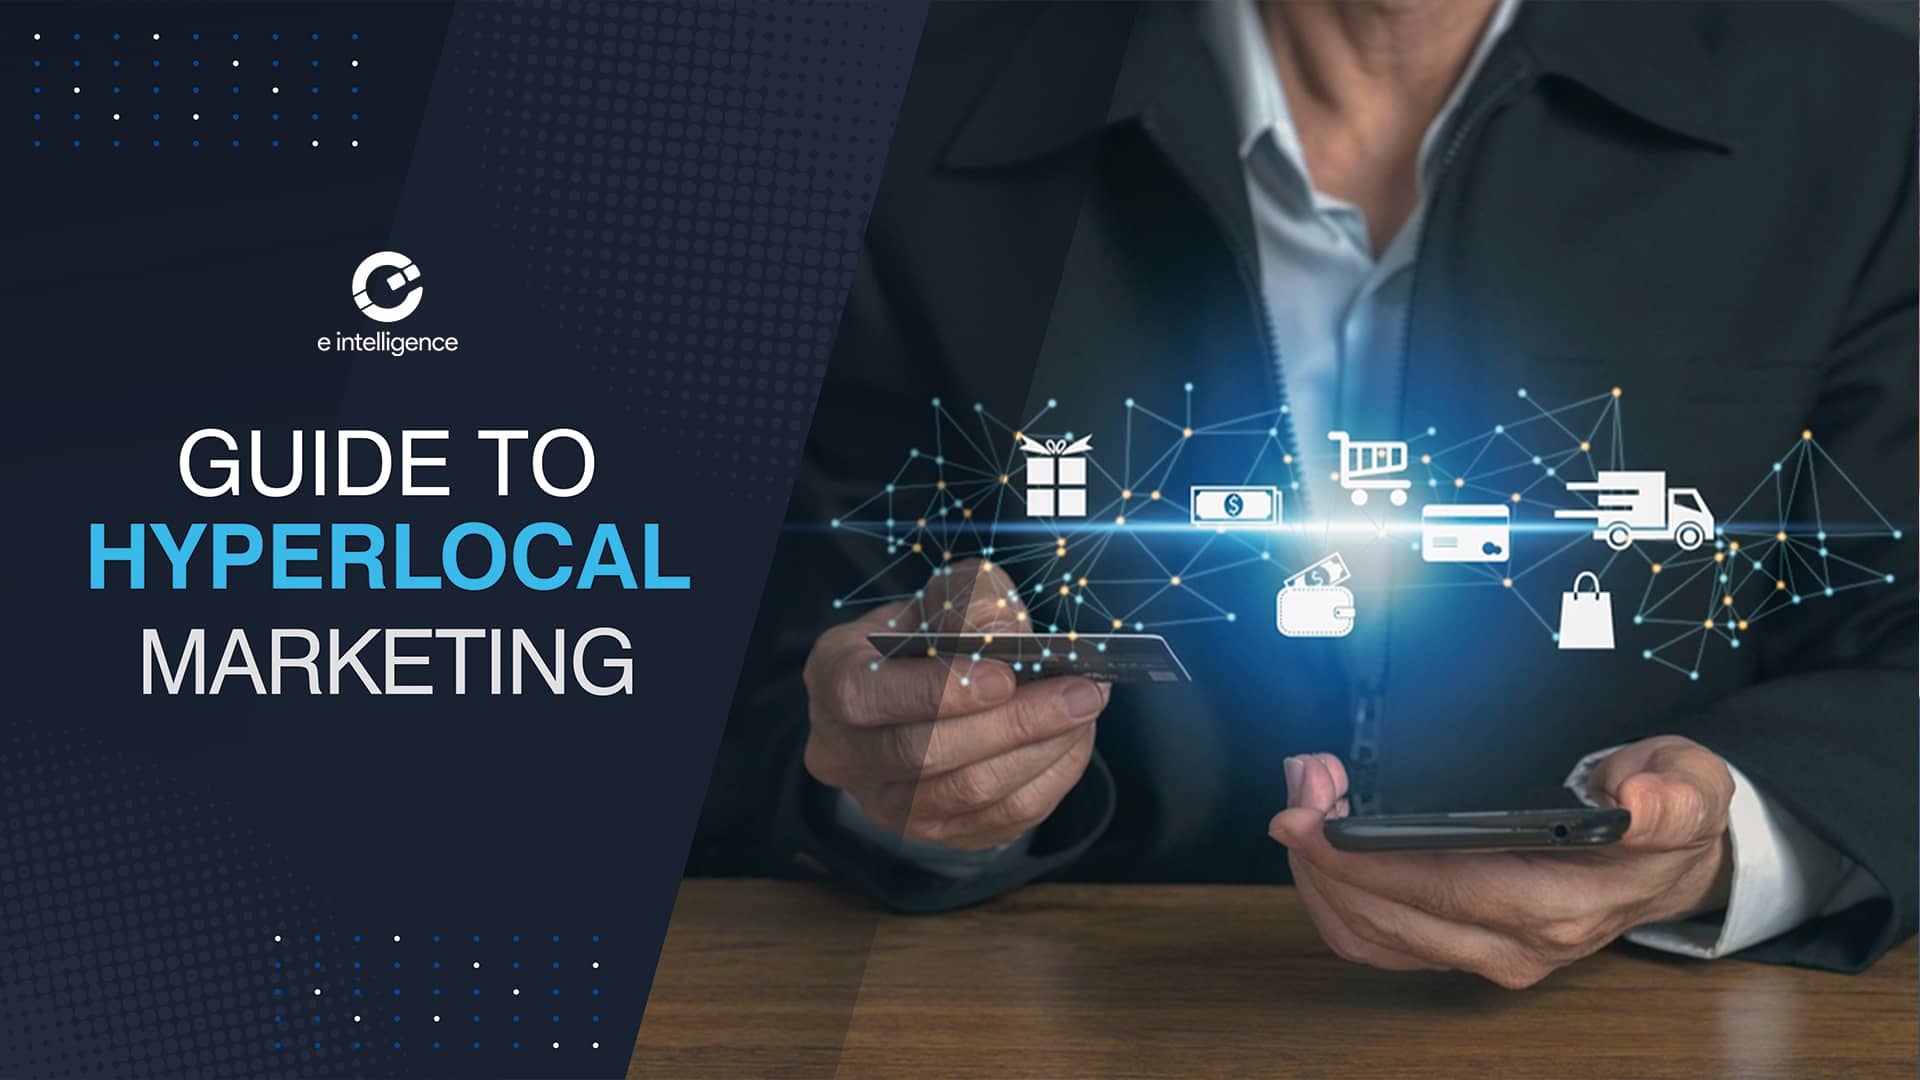 Guide-to-hyperlocal-marketing-banner